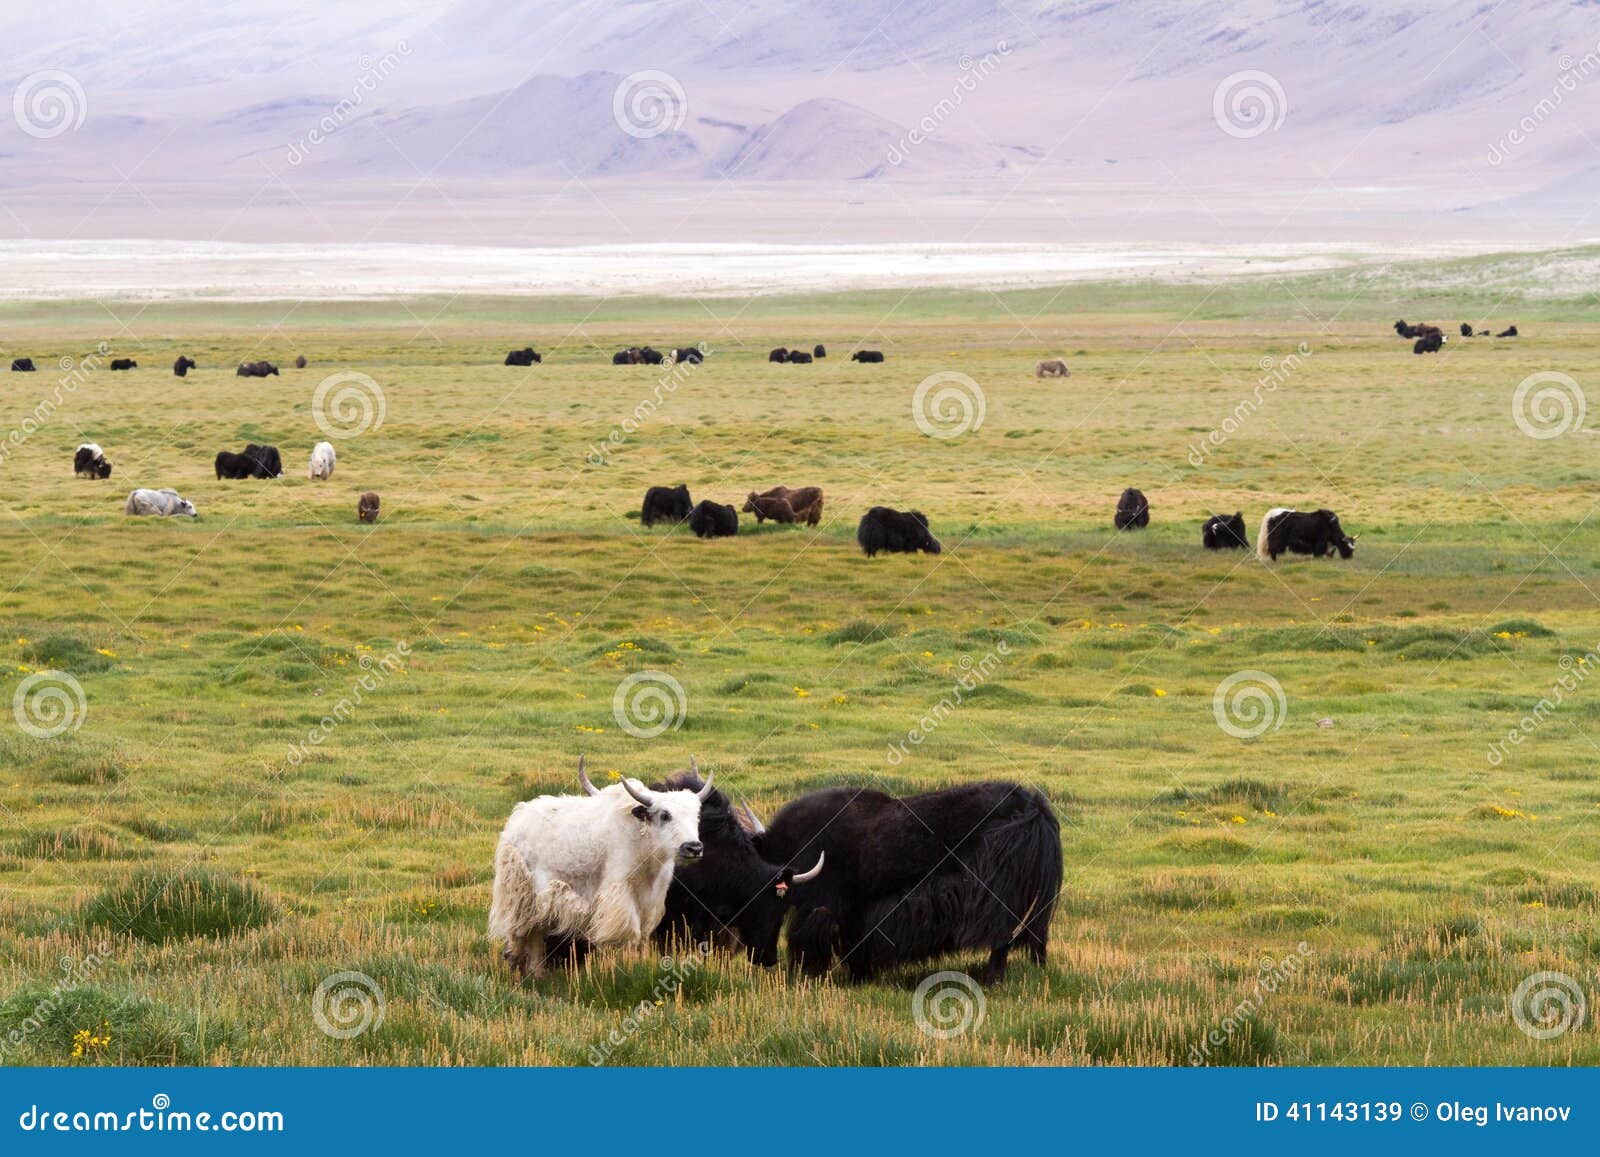 Yaks herd on the meadow against the Himalayas mountain (Ladakh, India)